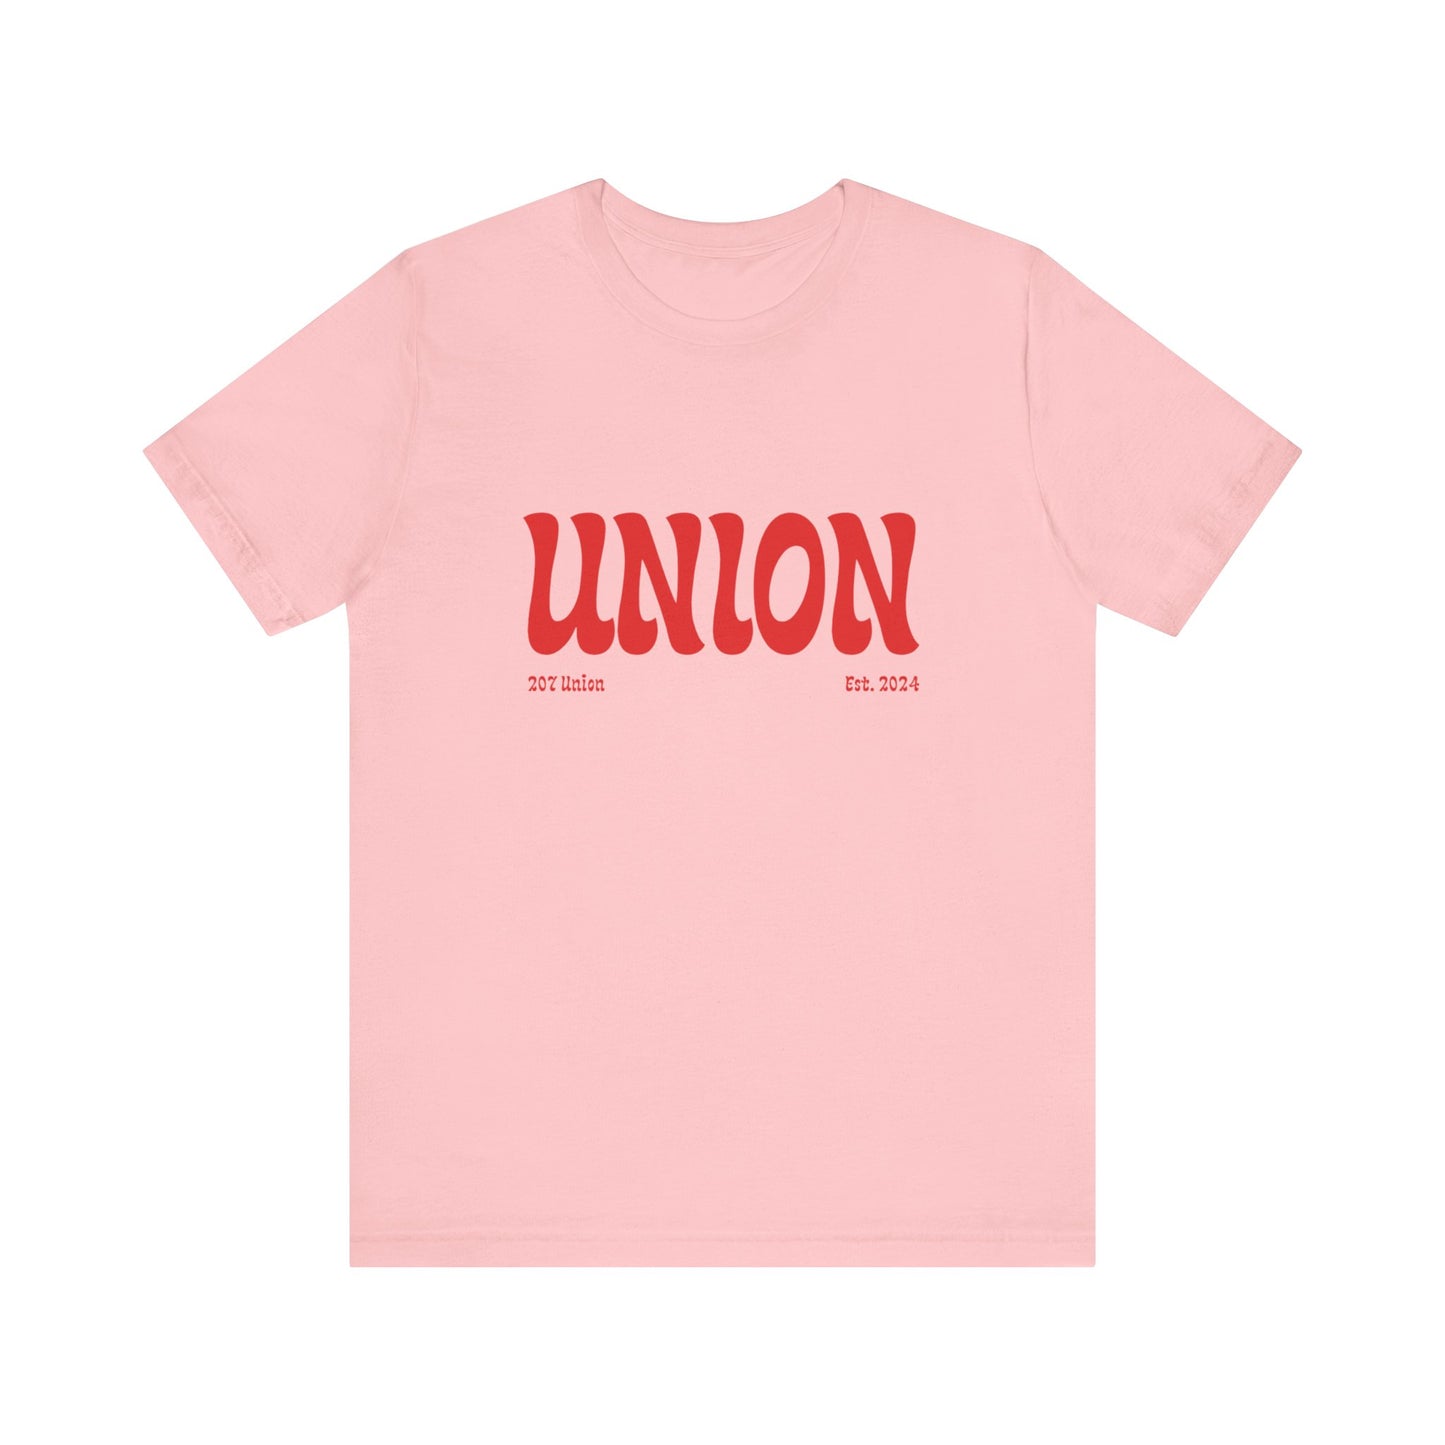 207 Union "One Off" T-Shirt